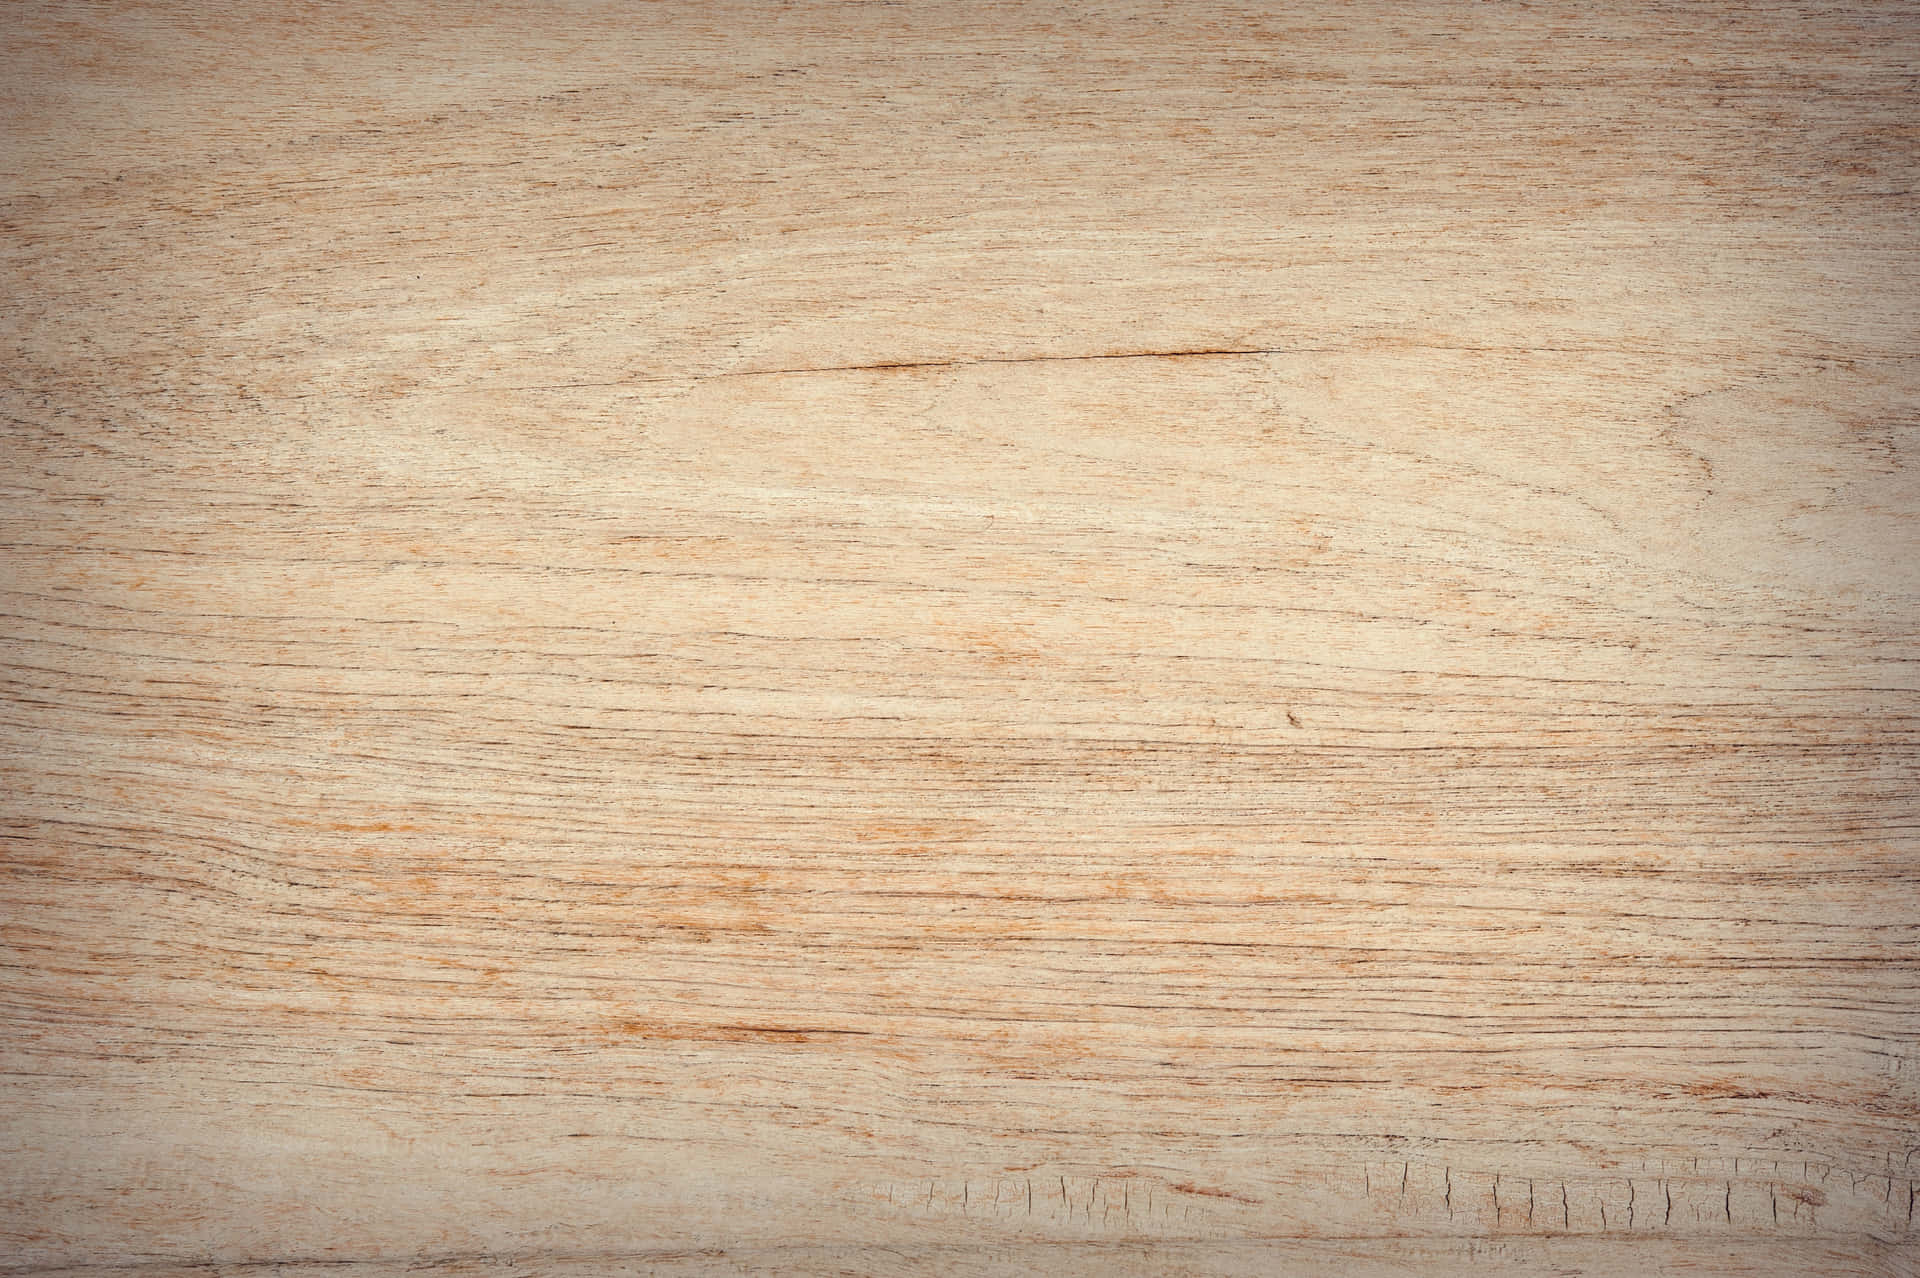 Wood texture background that showcases the natural beauty of wood.